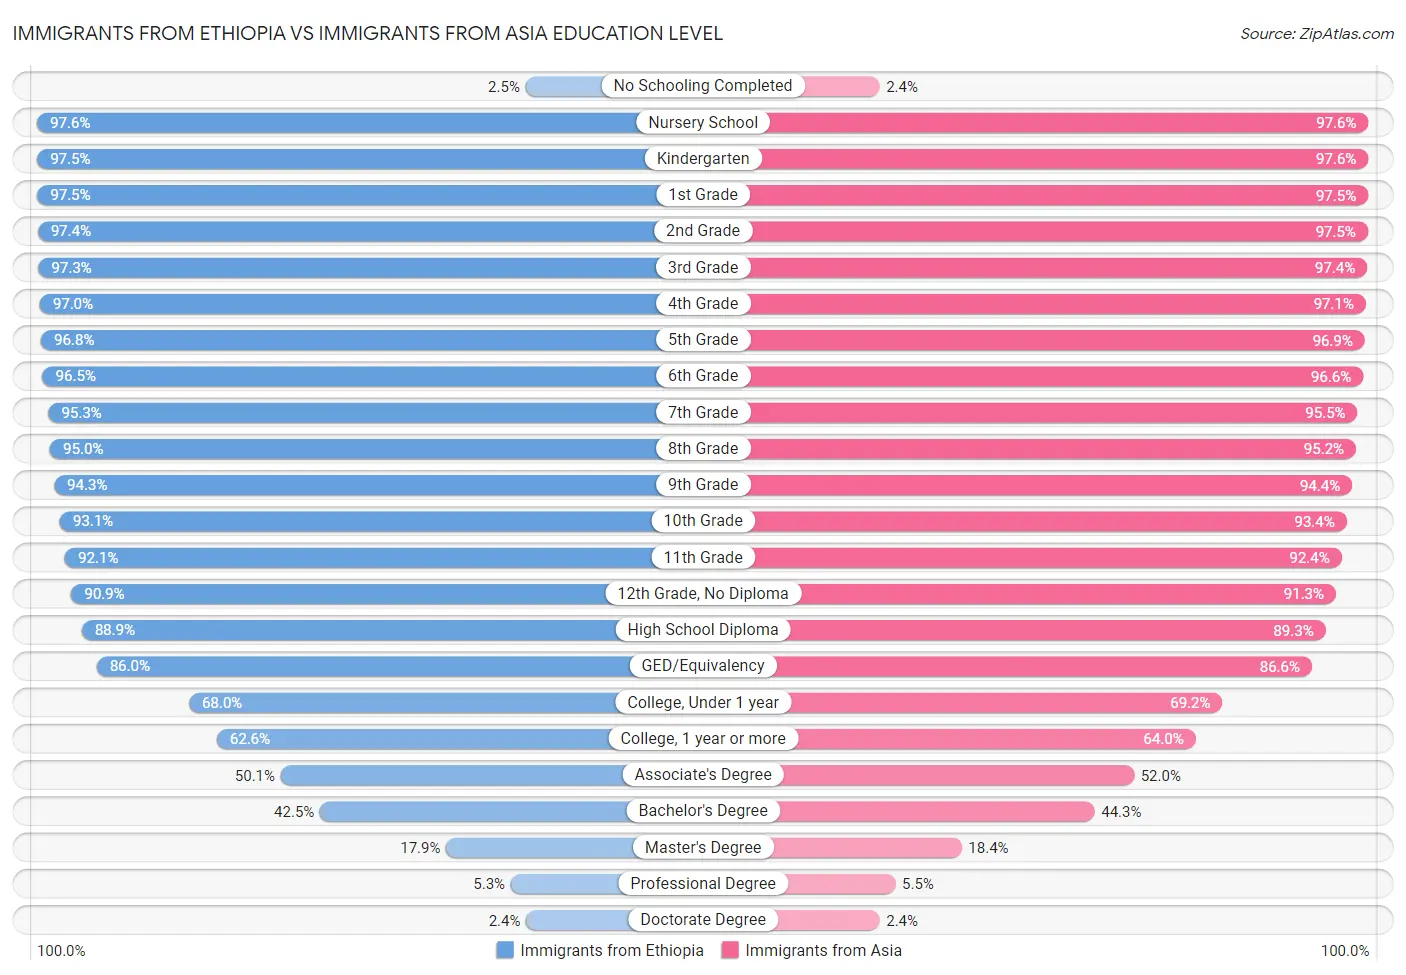 Immigrants from Ethiopia vs Immigrants from Asia Education Level